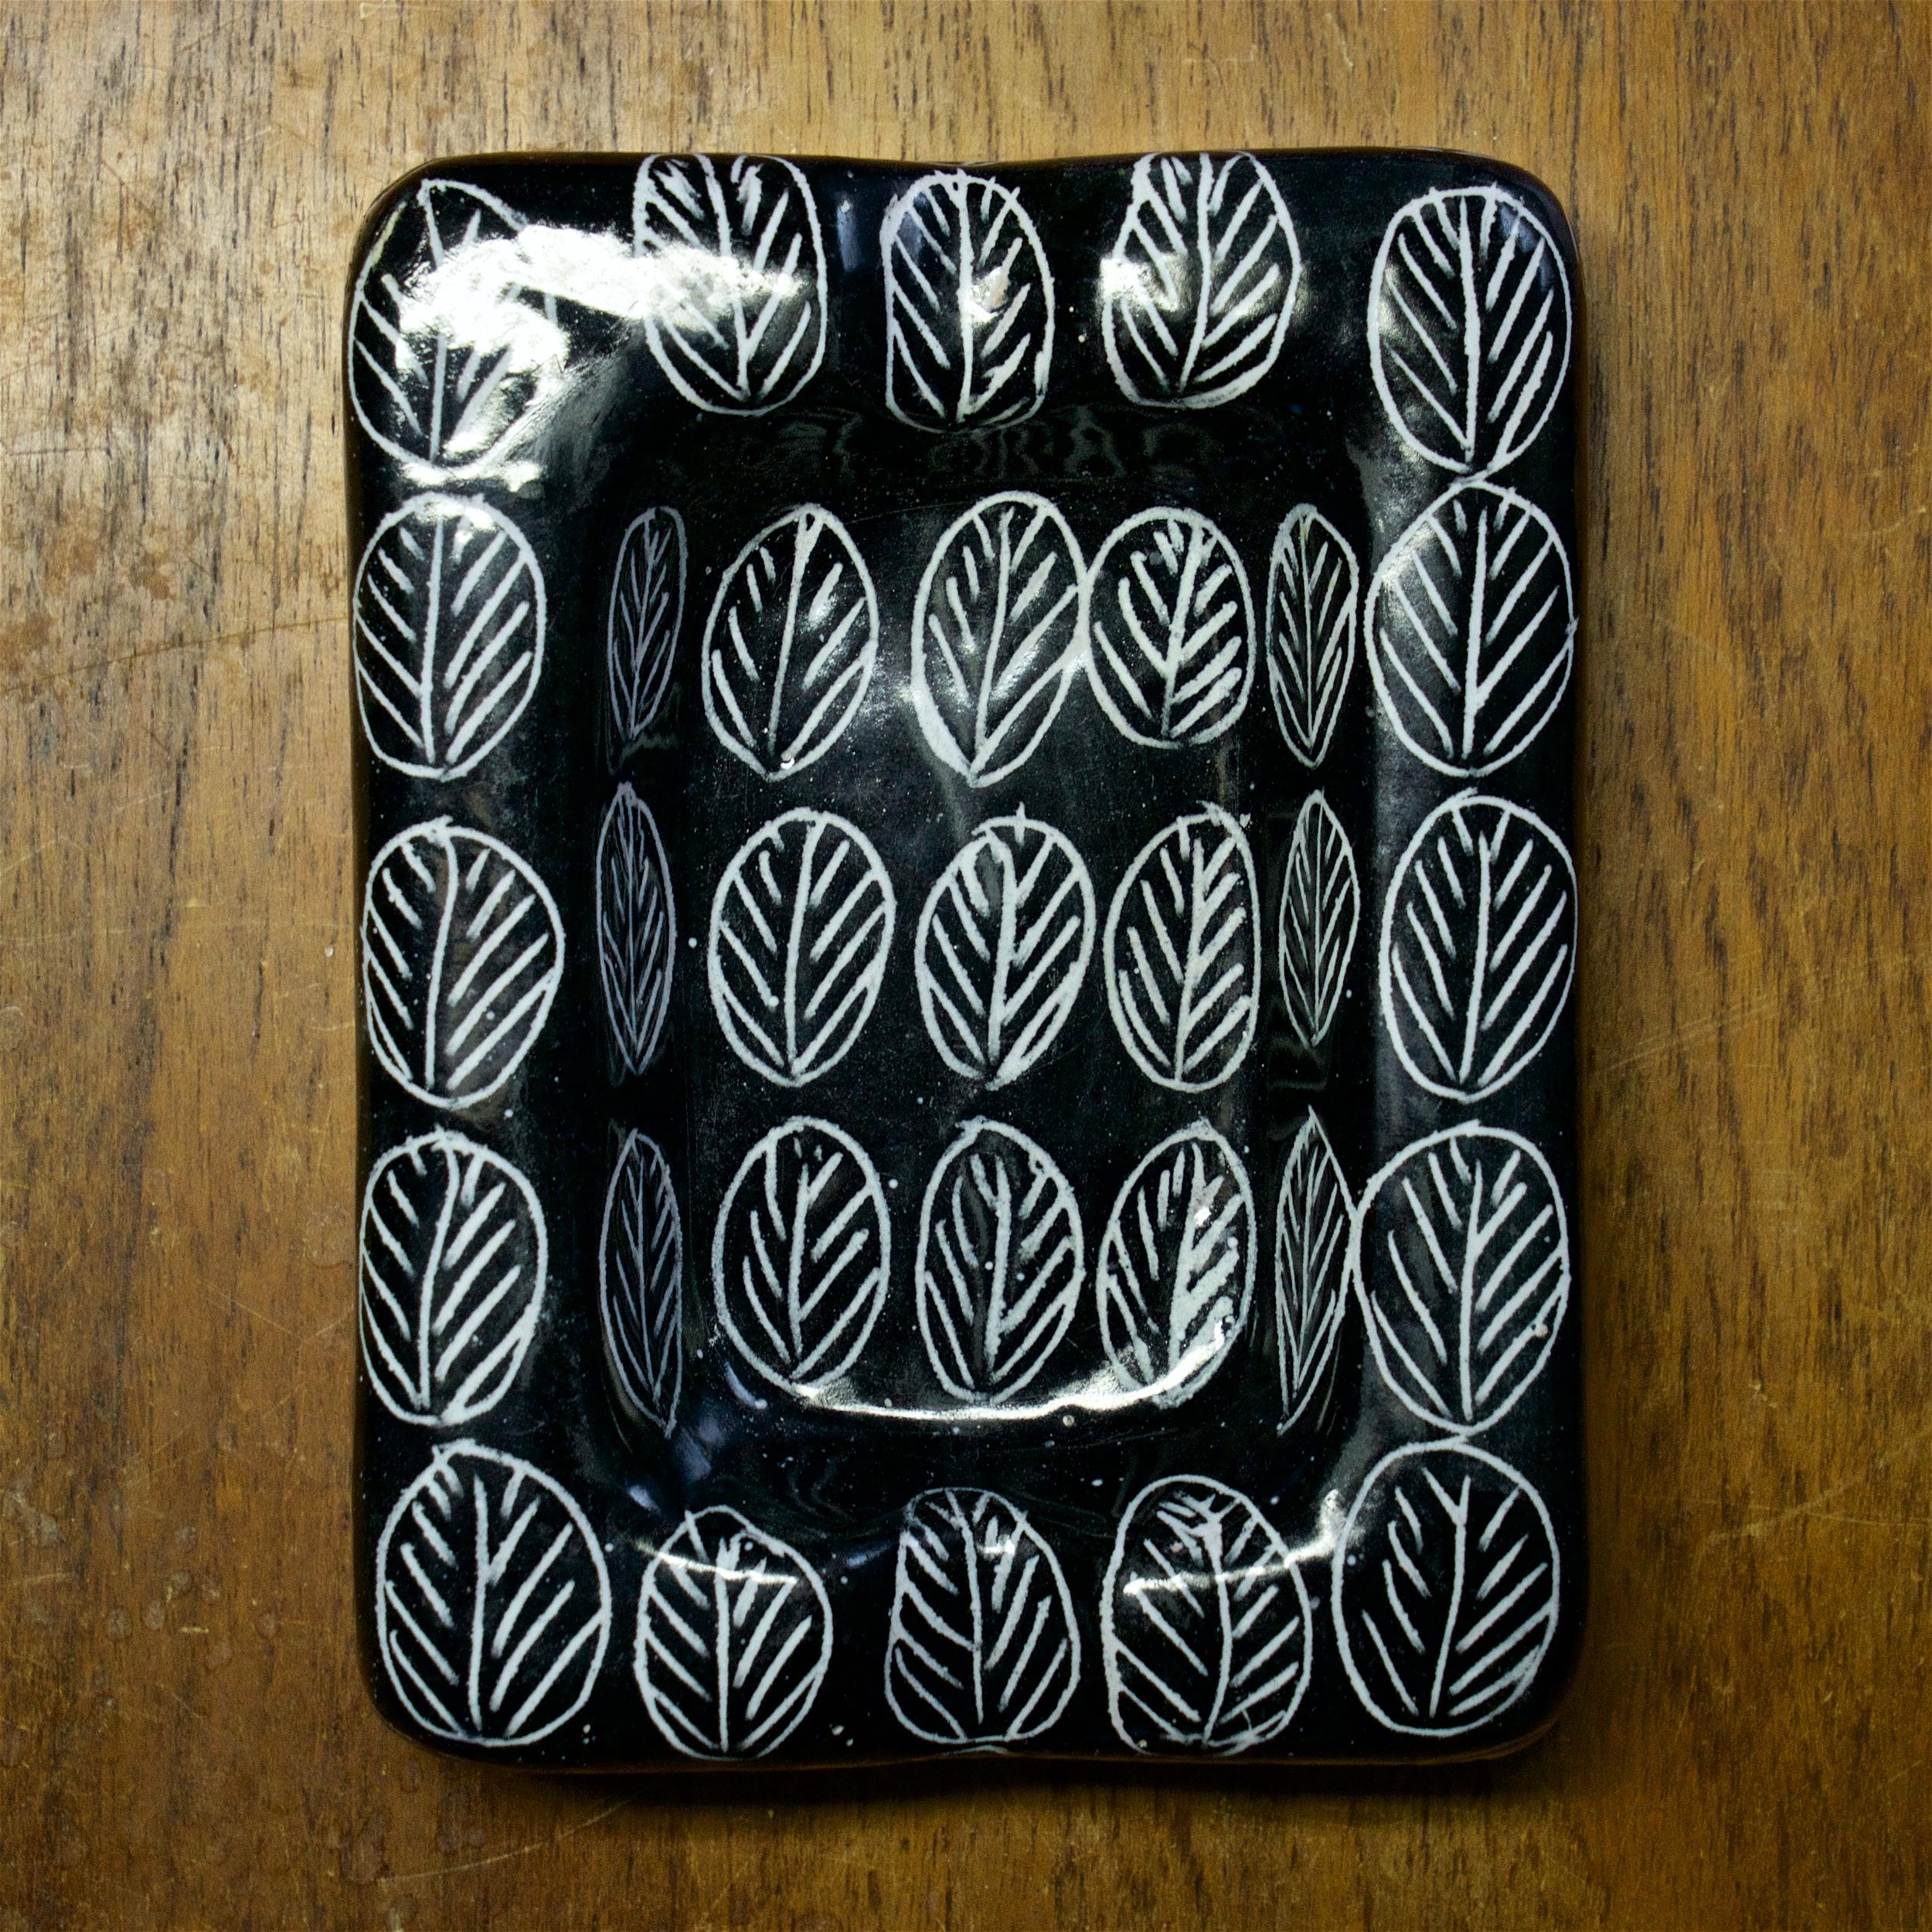 Italian 1950s Black White Leaf Ashtray Dish Raymor Pottery Cigar Abstract Jouves French For Sale